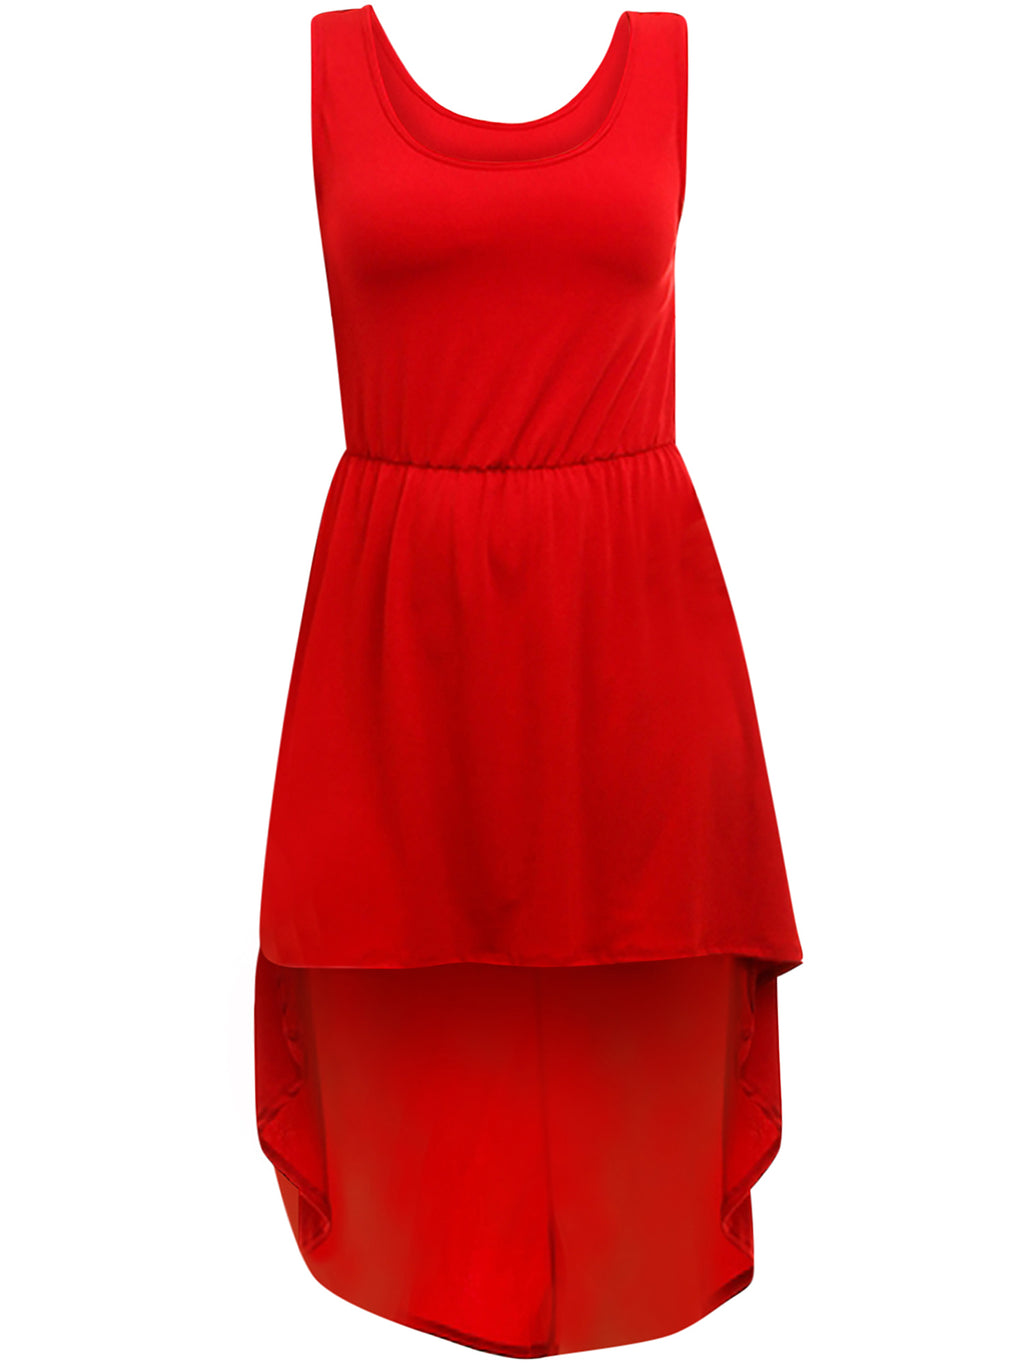 Simple Red Sleeveless High-Low Dress